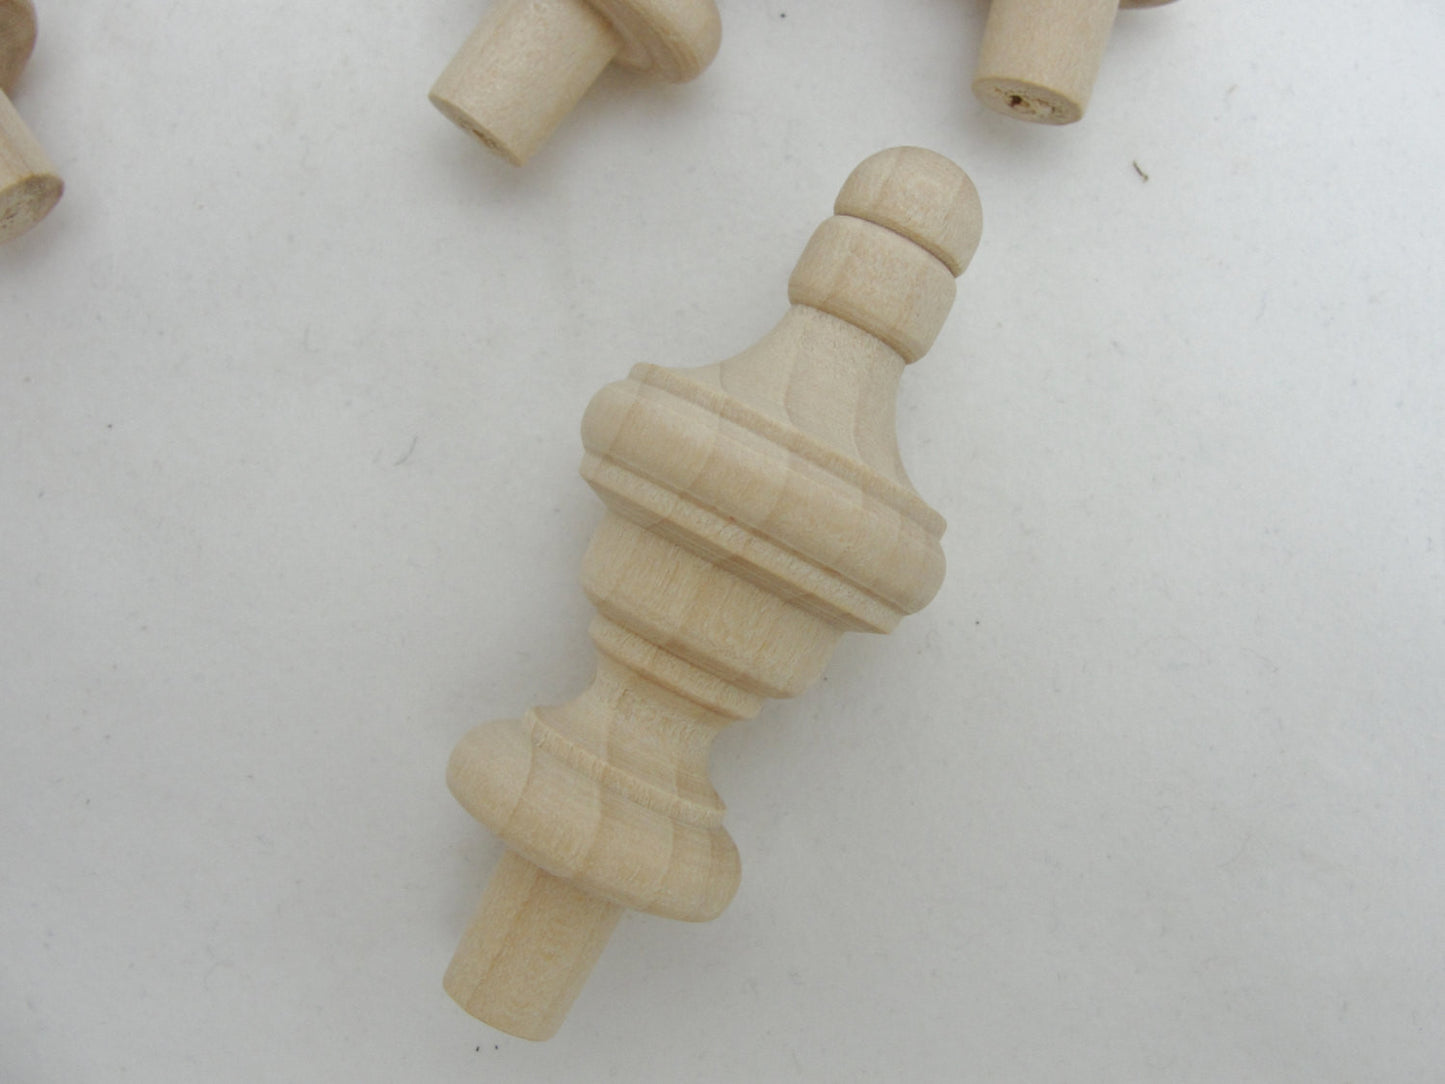 Small wooden finial set of 6 - Wood parts - Craft Supply House